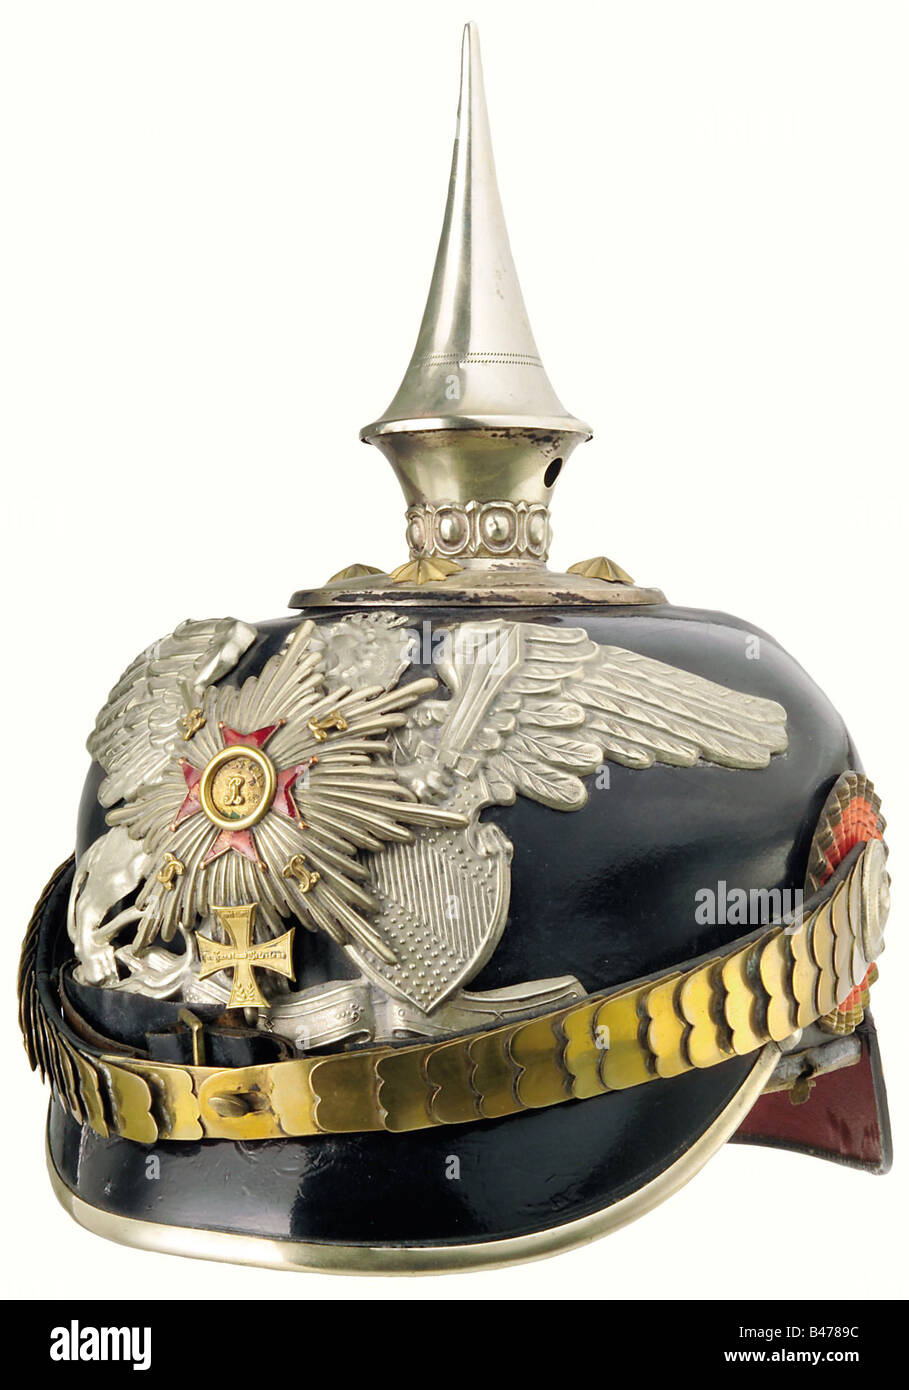 Baden: A helmet for officers, of the 1st Baden Leib Grenadier Regiment No. 109. The leather skull shows minimal crazing, the seam of the rear peak has opened on one side. A tall, unscrewable spike, and a large plate bearing in its centre the star of the House Order of Loyalty, with some damage to the enamel of the left and lower limb of the cross. Flat chinscales attached to officers' style cockades. The liner of ribbed silk is a bit loose and shows traces of wear, as does the sweatband. The size is given on the interior of the skull as 54. Comes complete with , Stock Photo